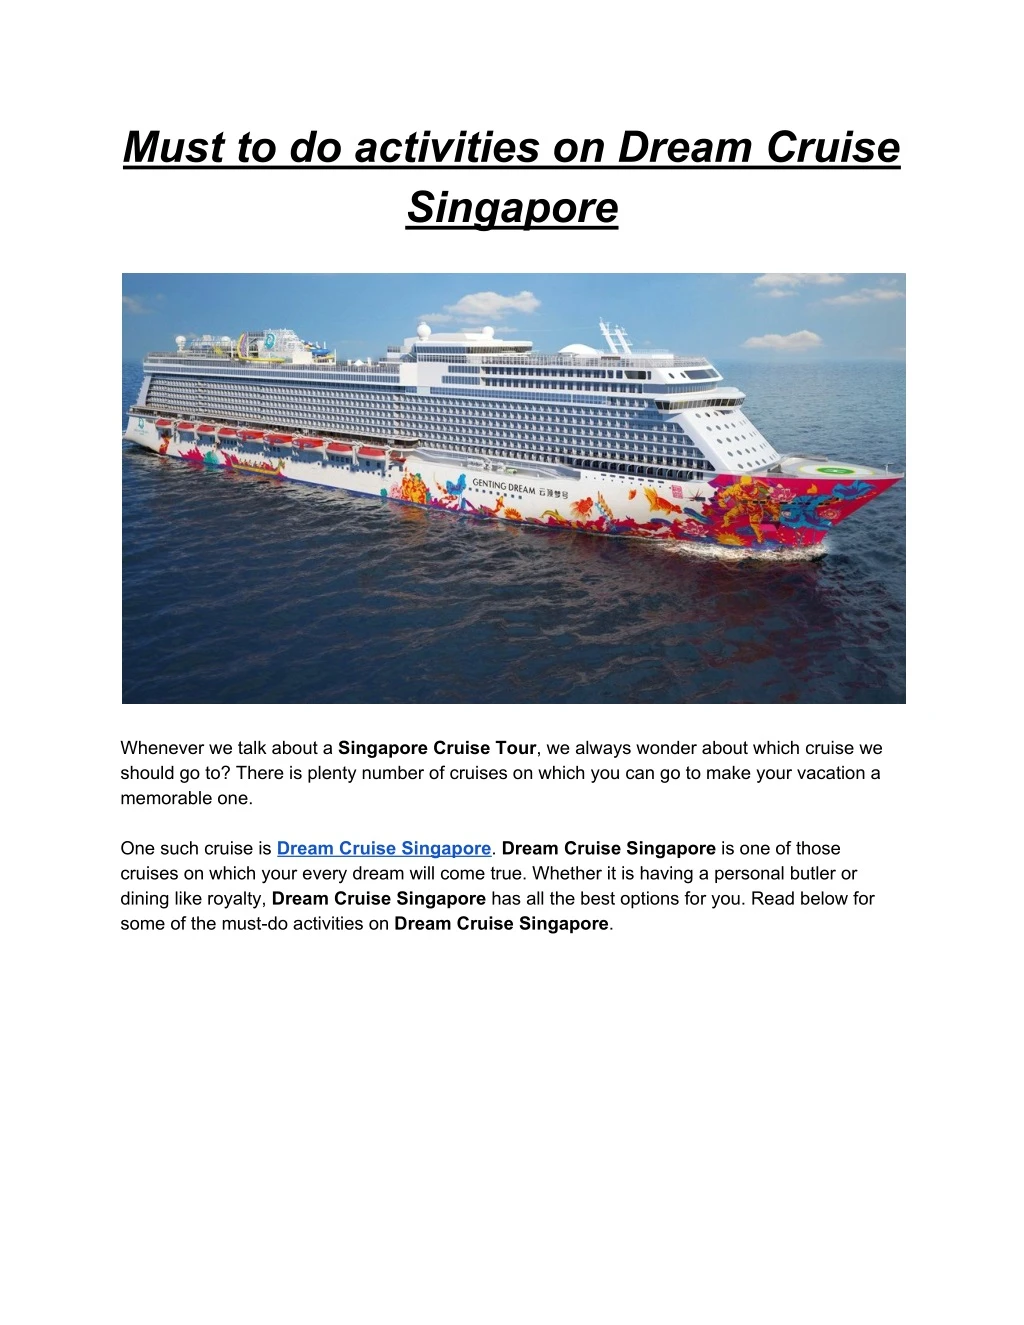 must to do activities on dream cruise singapore